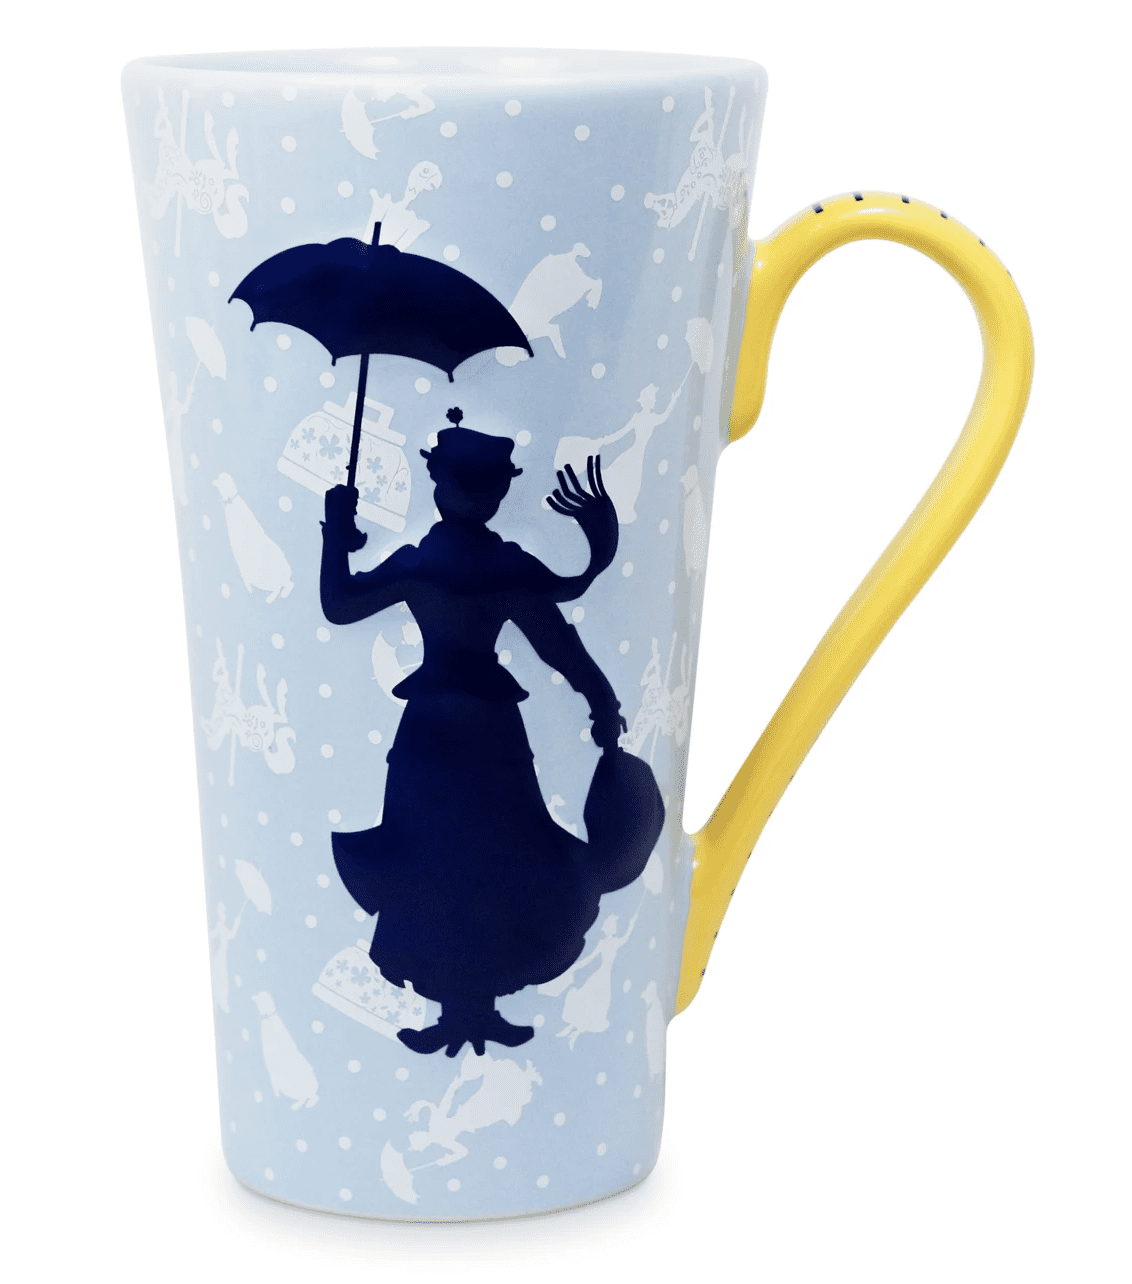 OFFICIAL MARY POPPINS DISNEY 3D SHAPED PENGUIN COFFEE MUG CUP NEW IN GIFT BOX 